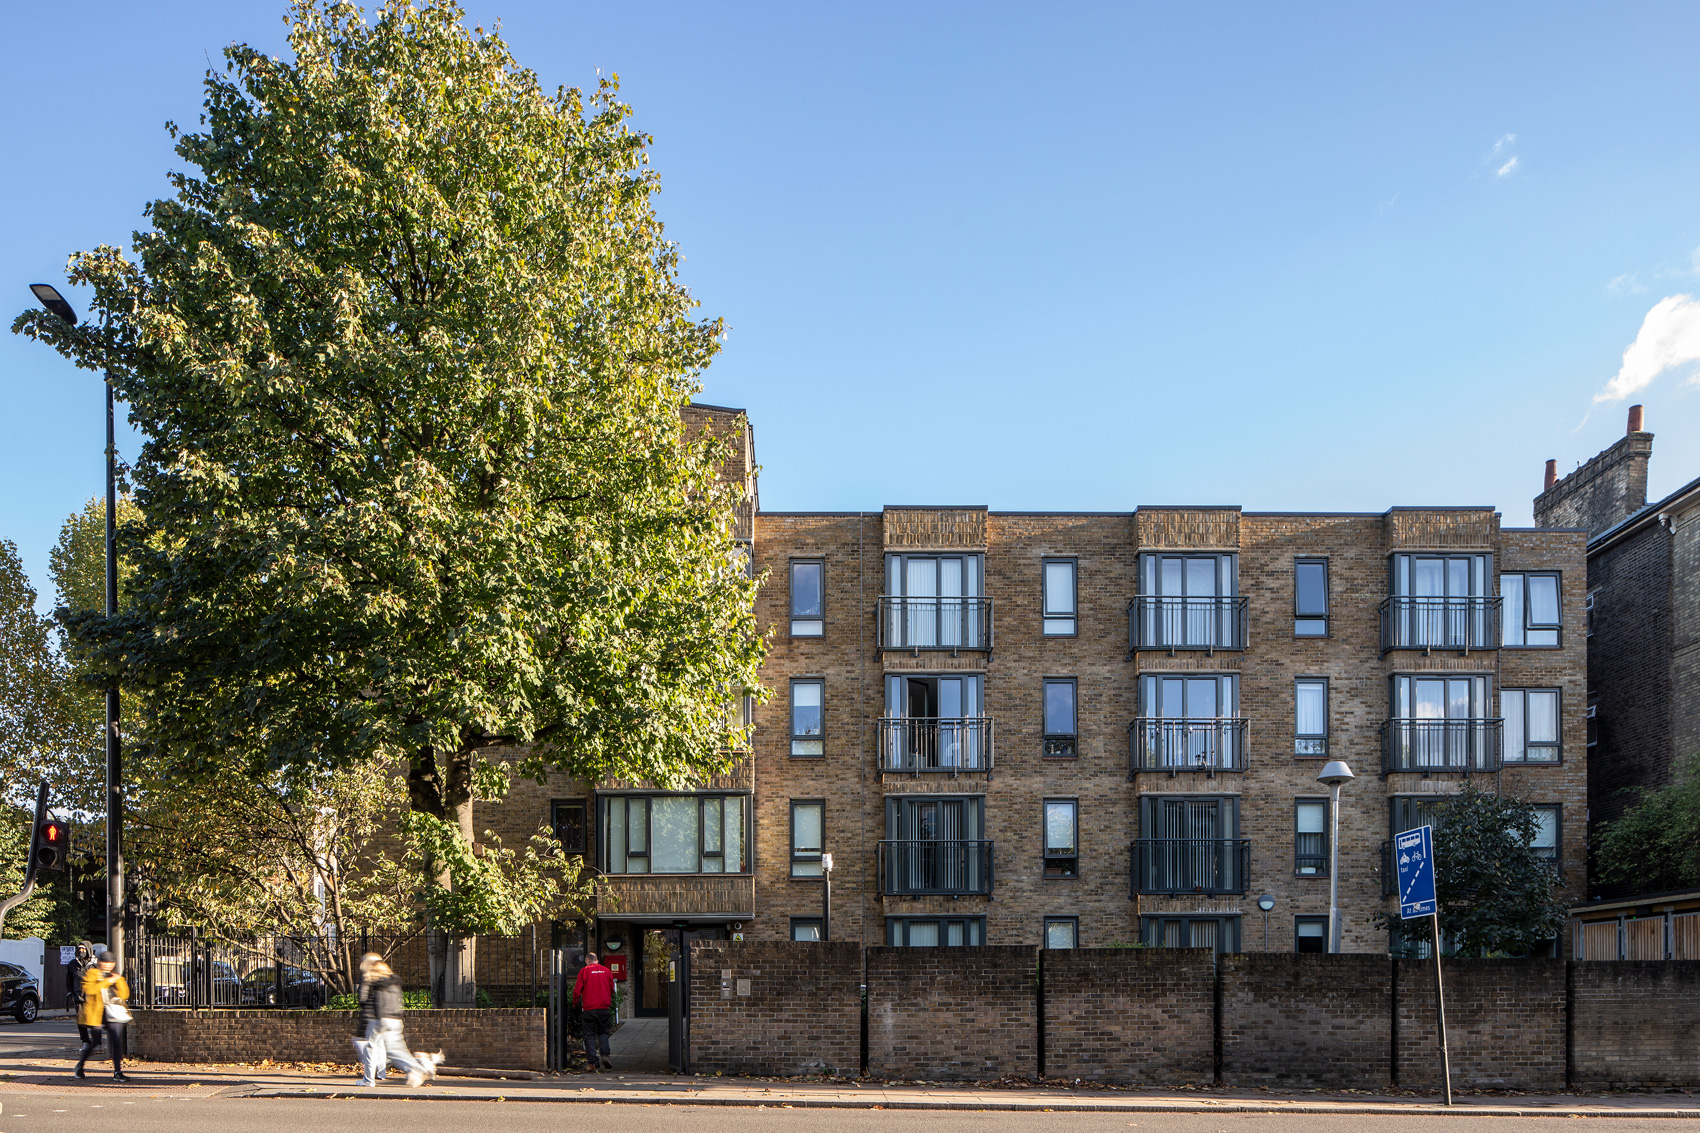 Retirement, Retirement Housing, Ashton Court, camden, conservation area, London, Residential Architecture, Residential, WWA Studios, WWA, West Waddy Archadia, West Waddy, Archadia, Architecture, Urban Design, Town Planning